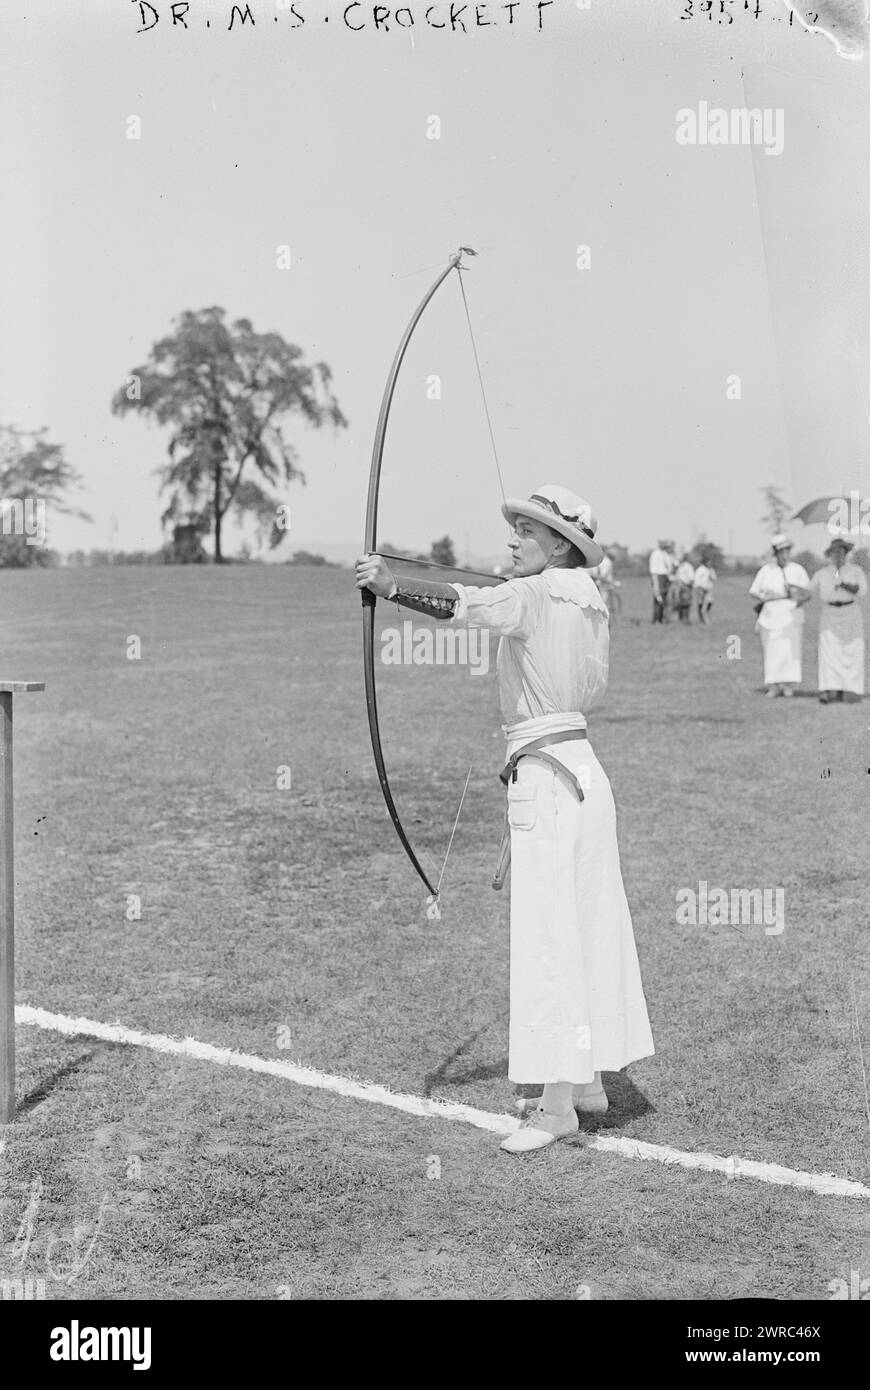 Dr. M.S. Crockett bow & arrow, Photograph shows Dr. Marguerite S. Crockett competing at the National Archery Tournament, Jersey City, New Jersey, August 22-25, 1916., between ca. 1915 and ca. 1920, Glass negatives, 1 negative: glass Stock Photo